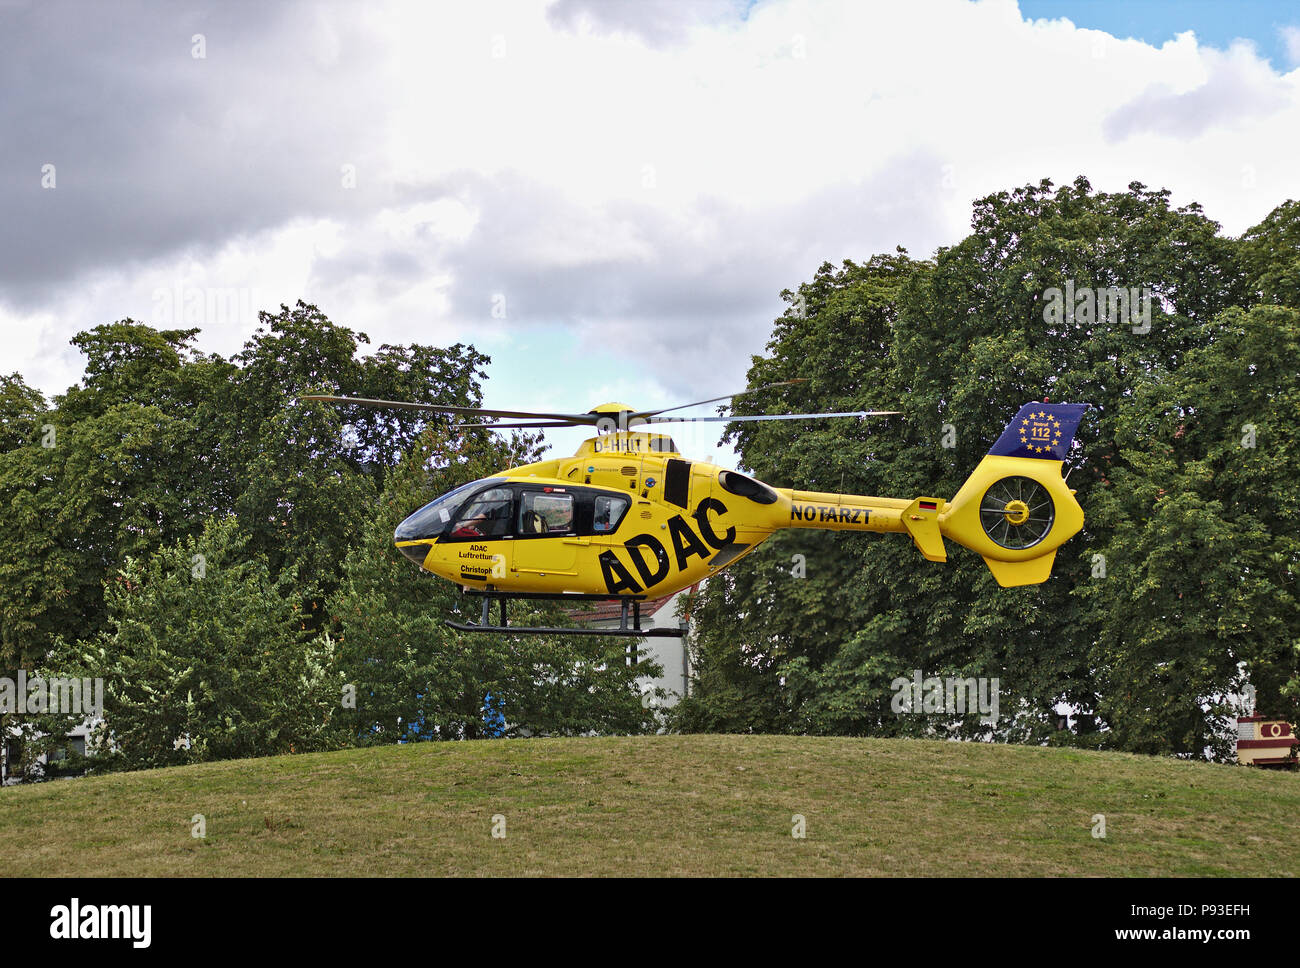 Bremen, Germany - July 10th, 2018 - Emergency rescue helicopter taking off in a park Stock Photo